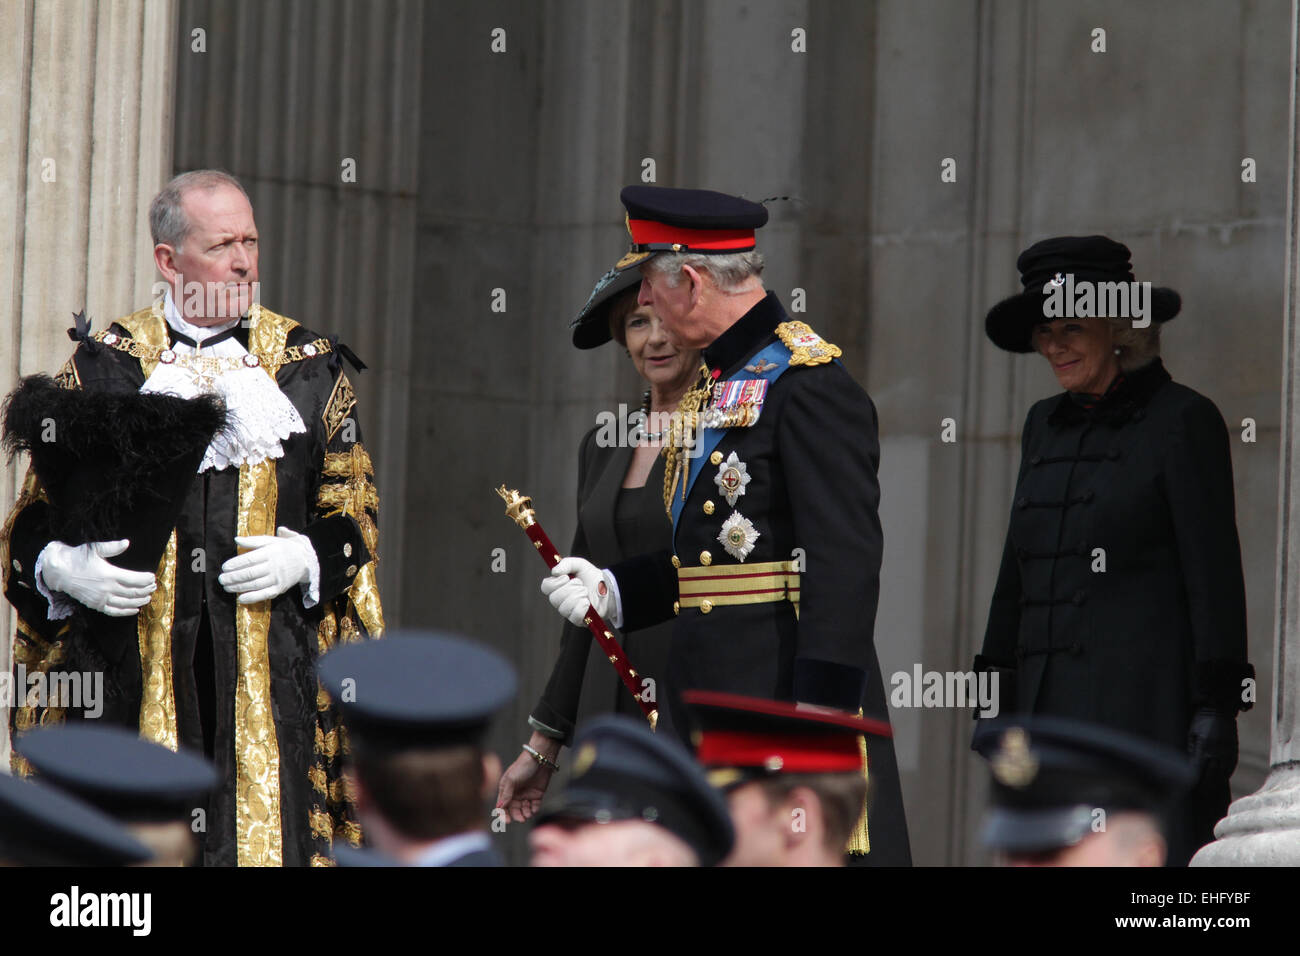 London, UK. 13th March, 2015. Prince William, Duke of Cambridge and Catherine, Duchess of Cambridge attends a Service of Commemo Stock Photo